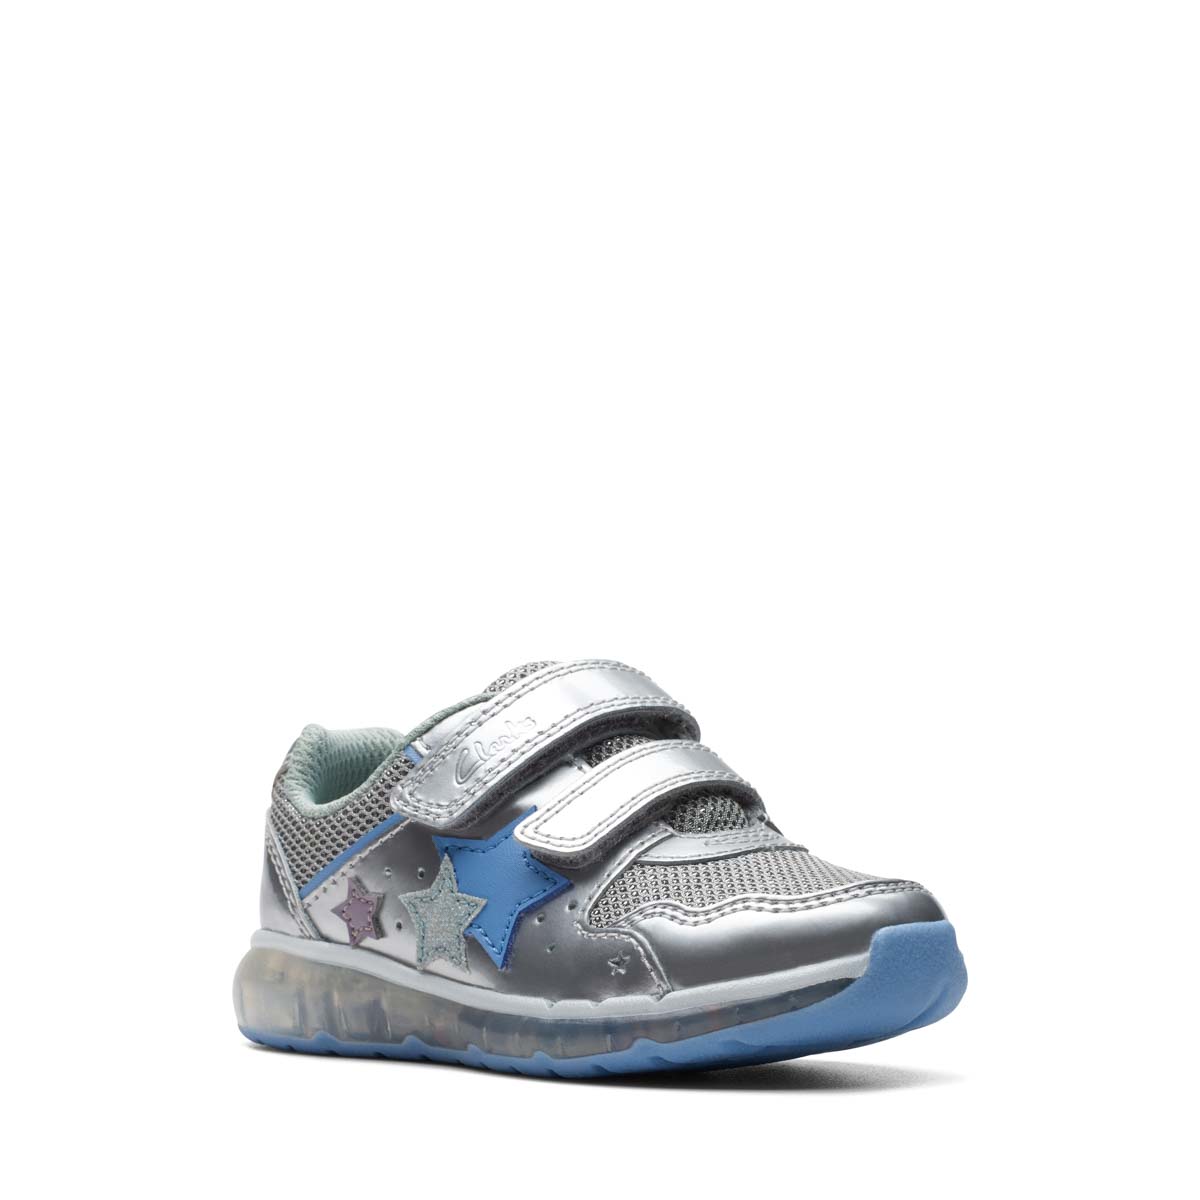 Clarks Spark New T 2V Silver Kids Toddler Girls Trainers 751516F In Size 4.5 In Plain Silver F Width Fitting Regular Fit